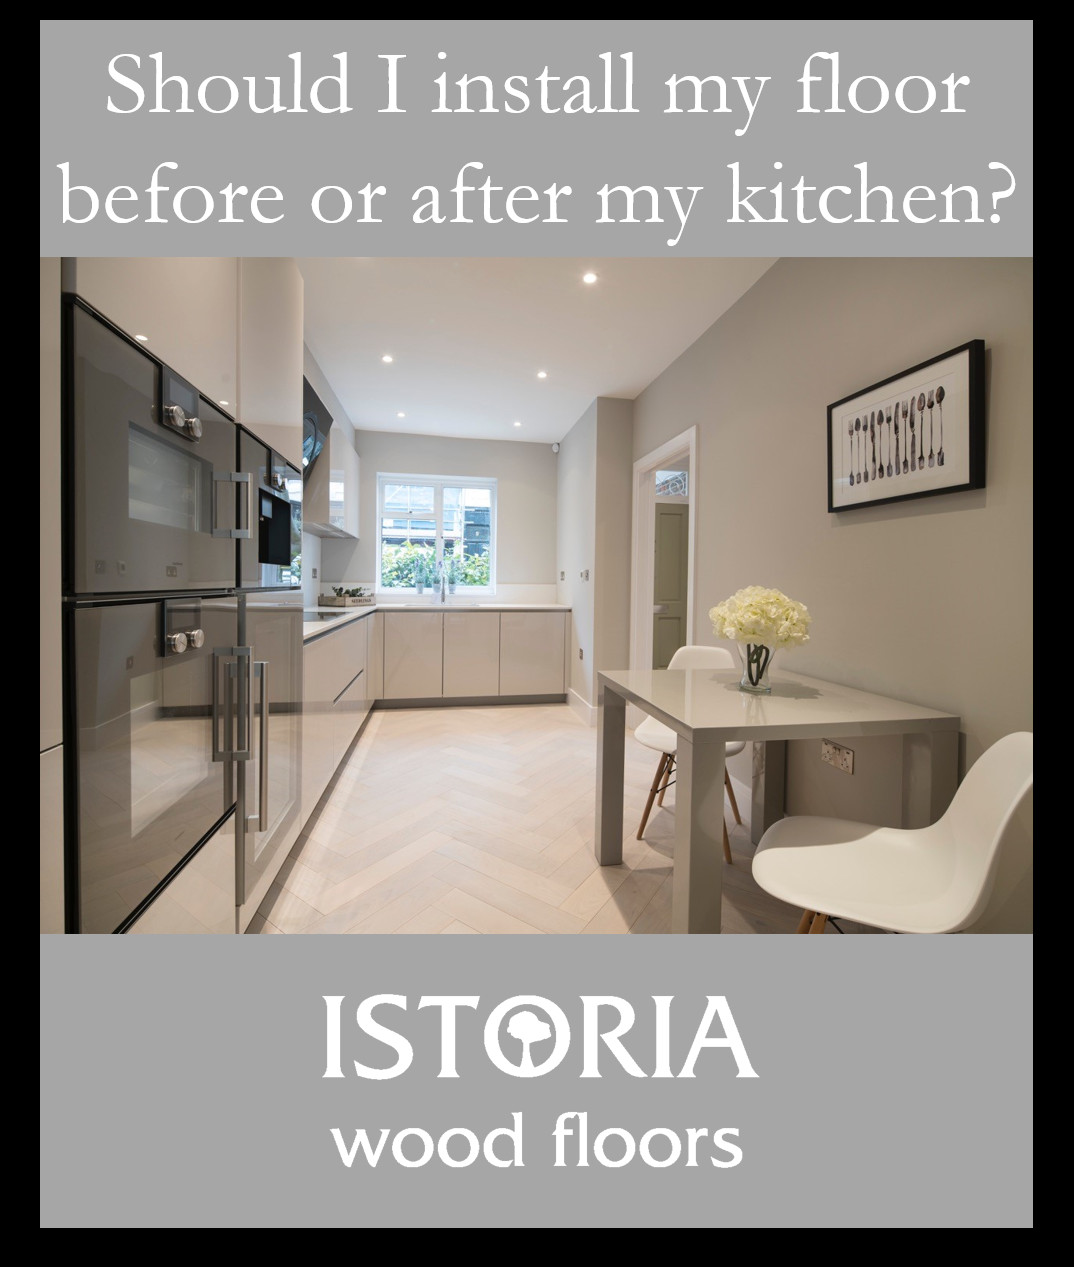 best humidity for hardwood floors of should i install my floor before or after my kitchen you can throughout learn the answers to the most frequently asked questions about wood flooring this includes wood floor installation cleaning wooden floors